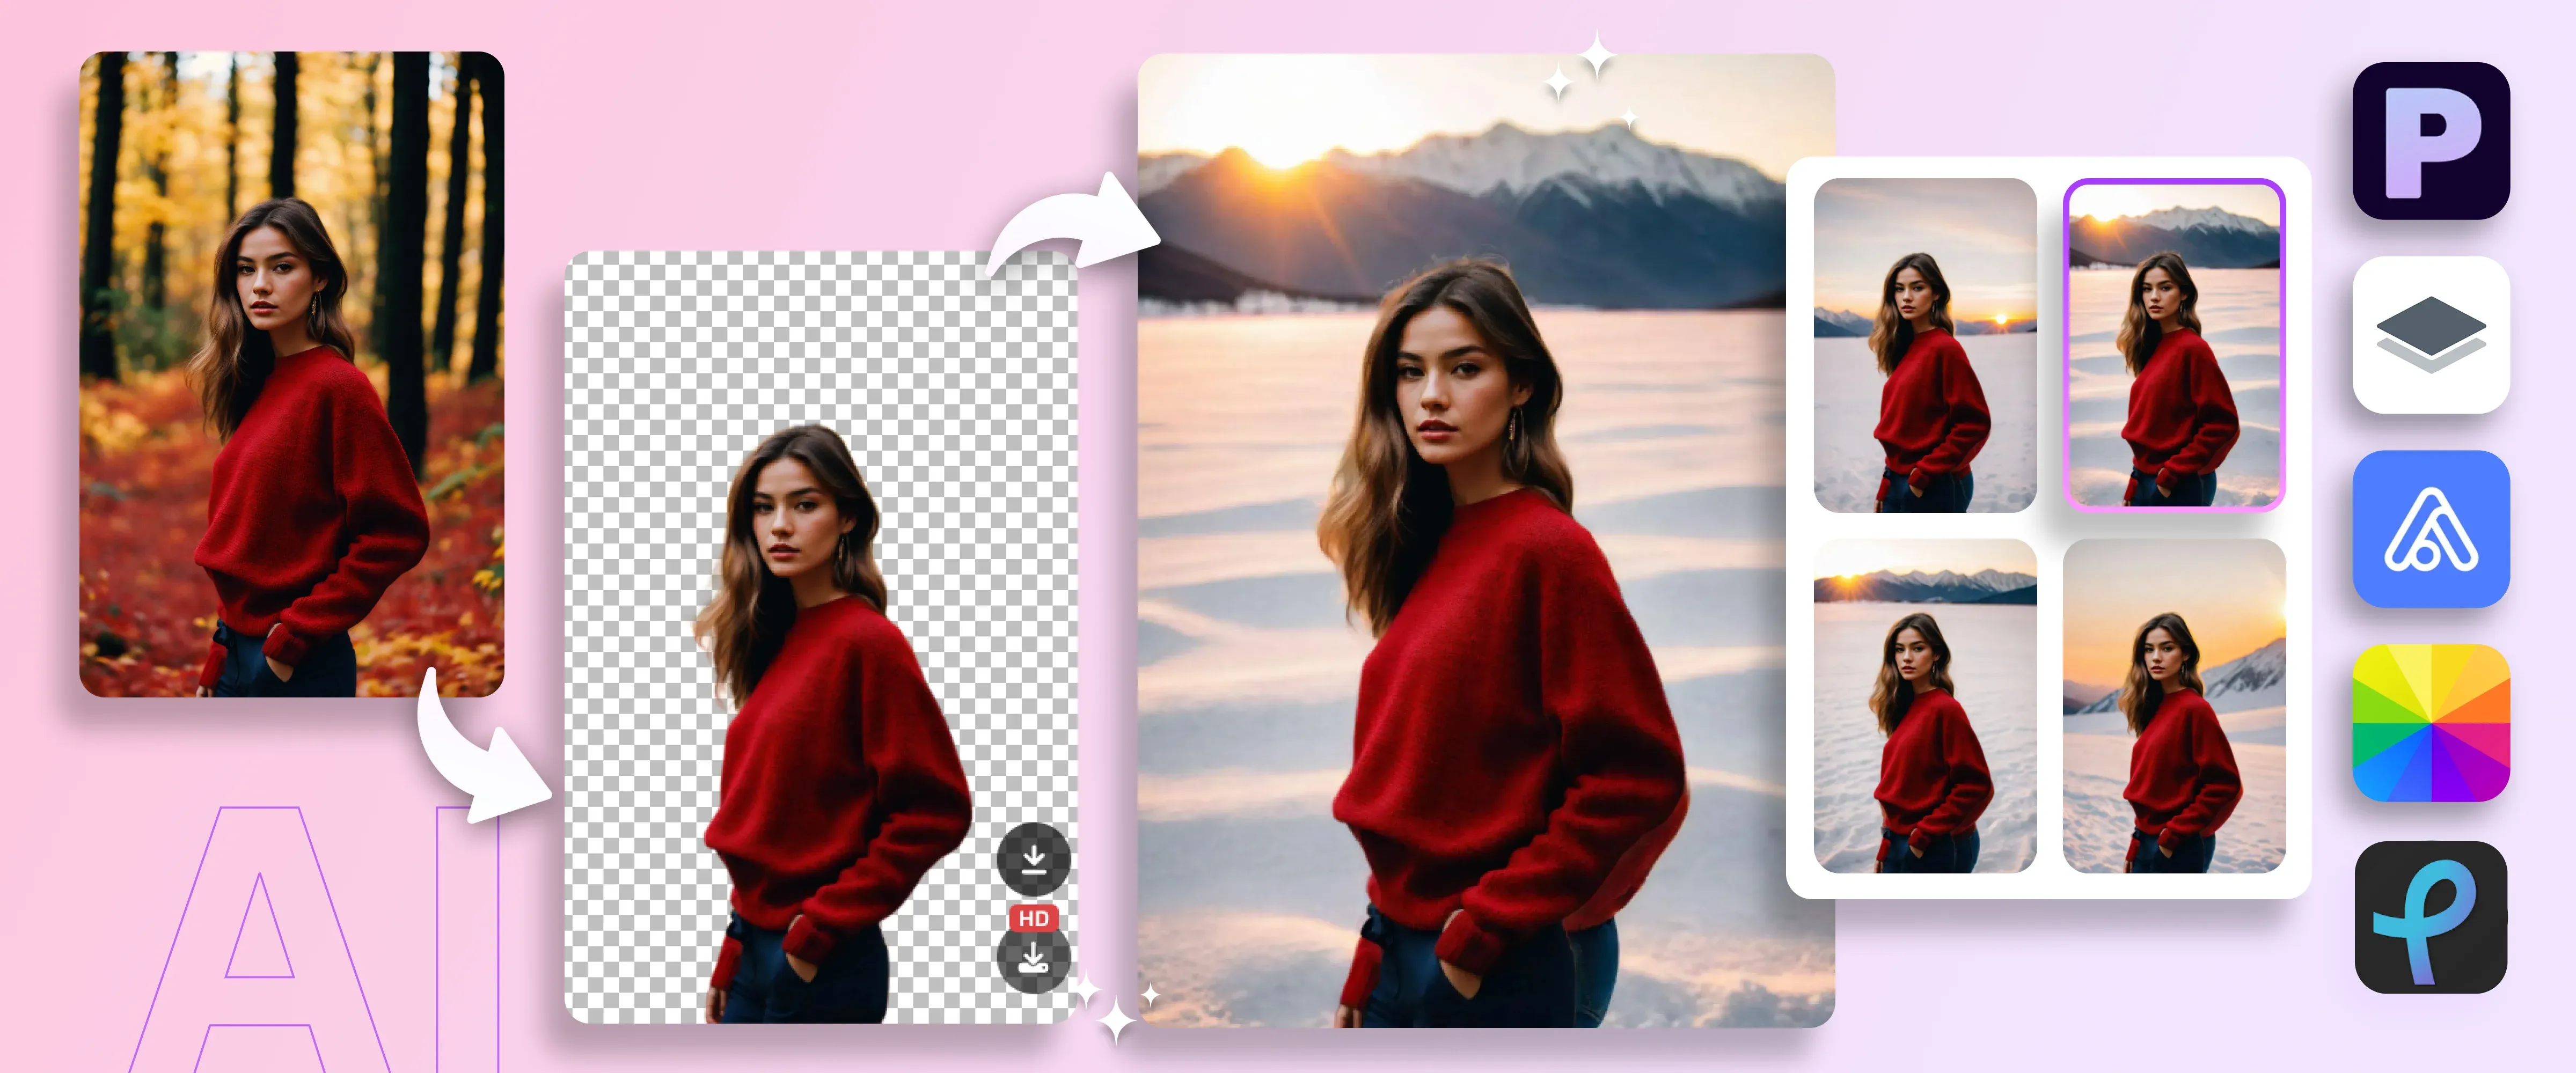 5 Best AI Background Removers to Remove Image Backgrounds cover